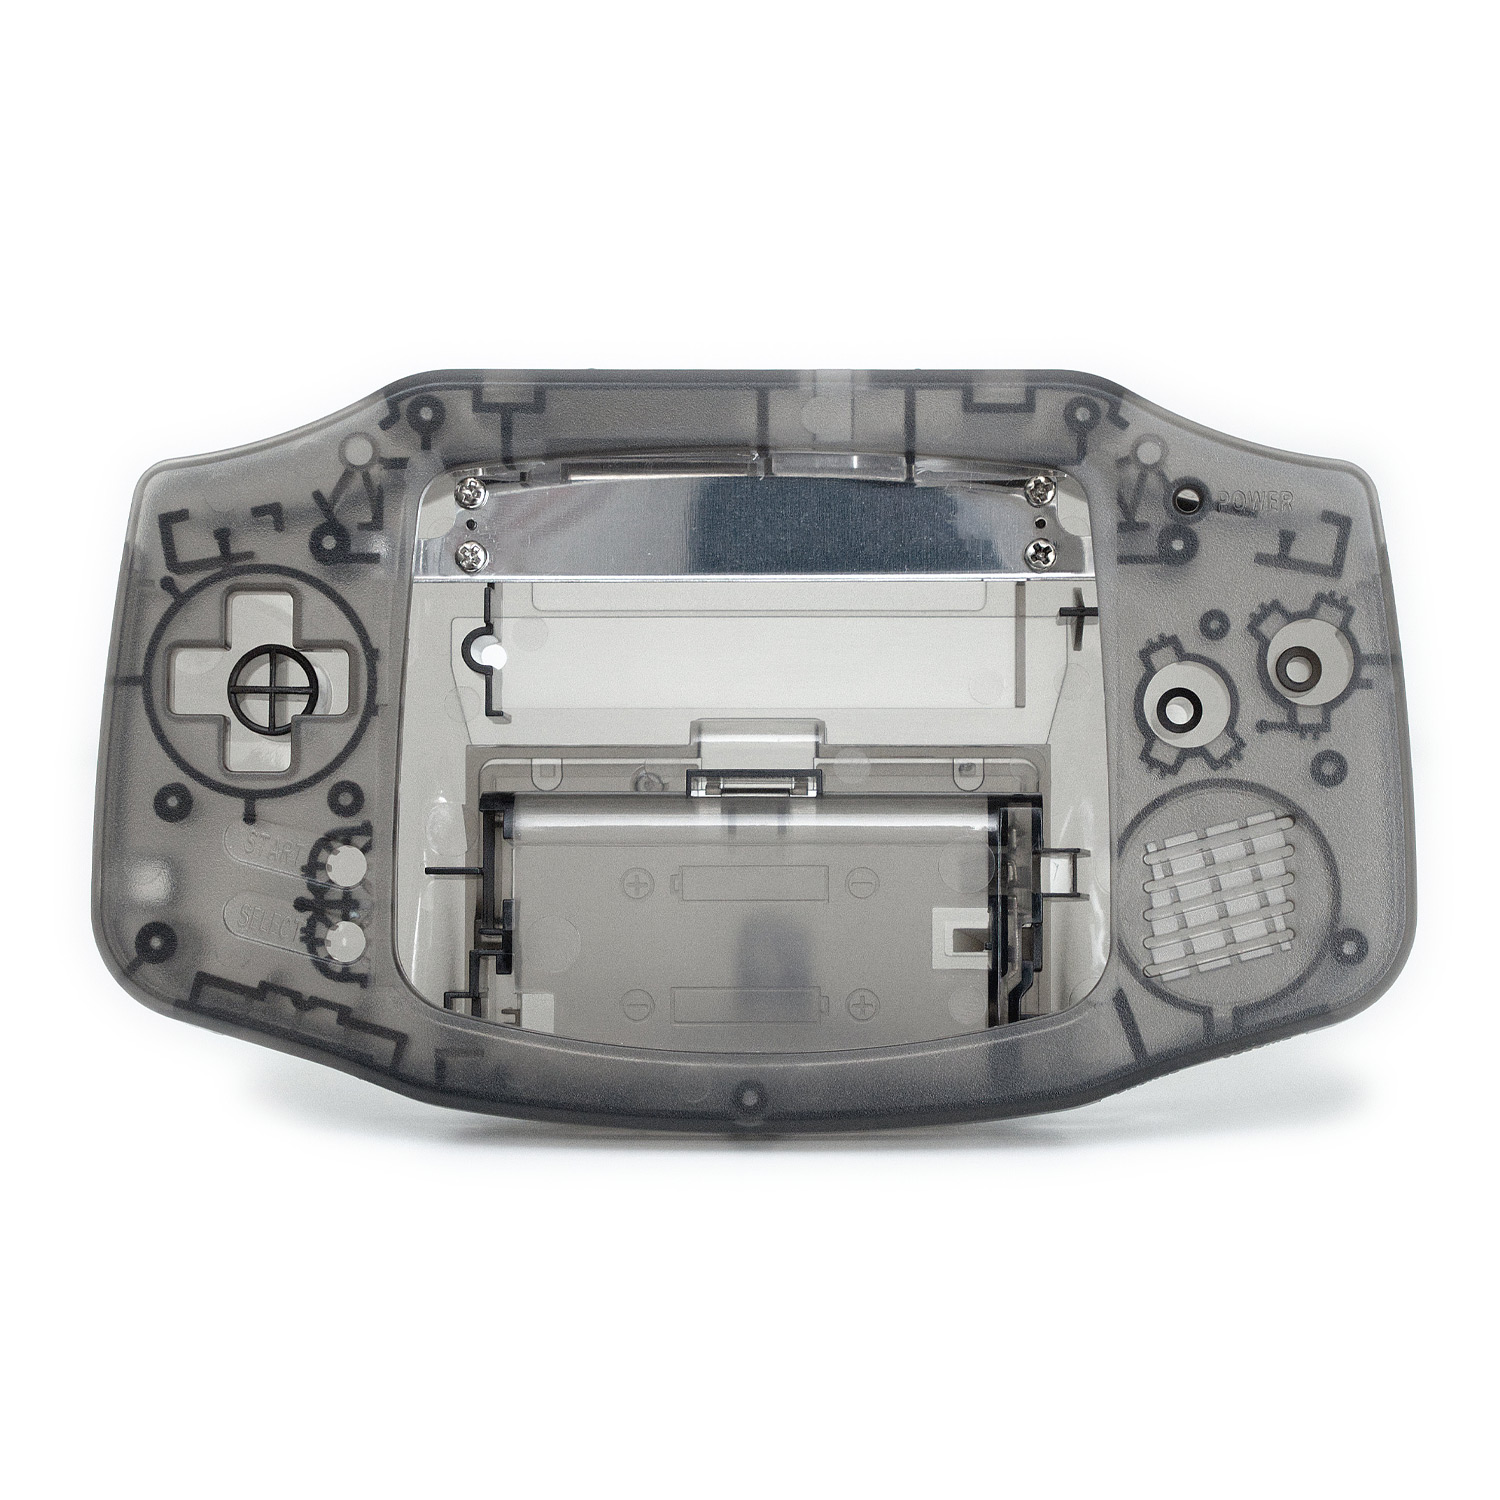 Game Boy Advance Shell for CleanScreen Laminated Kit (Clear Black)